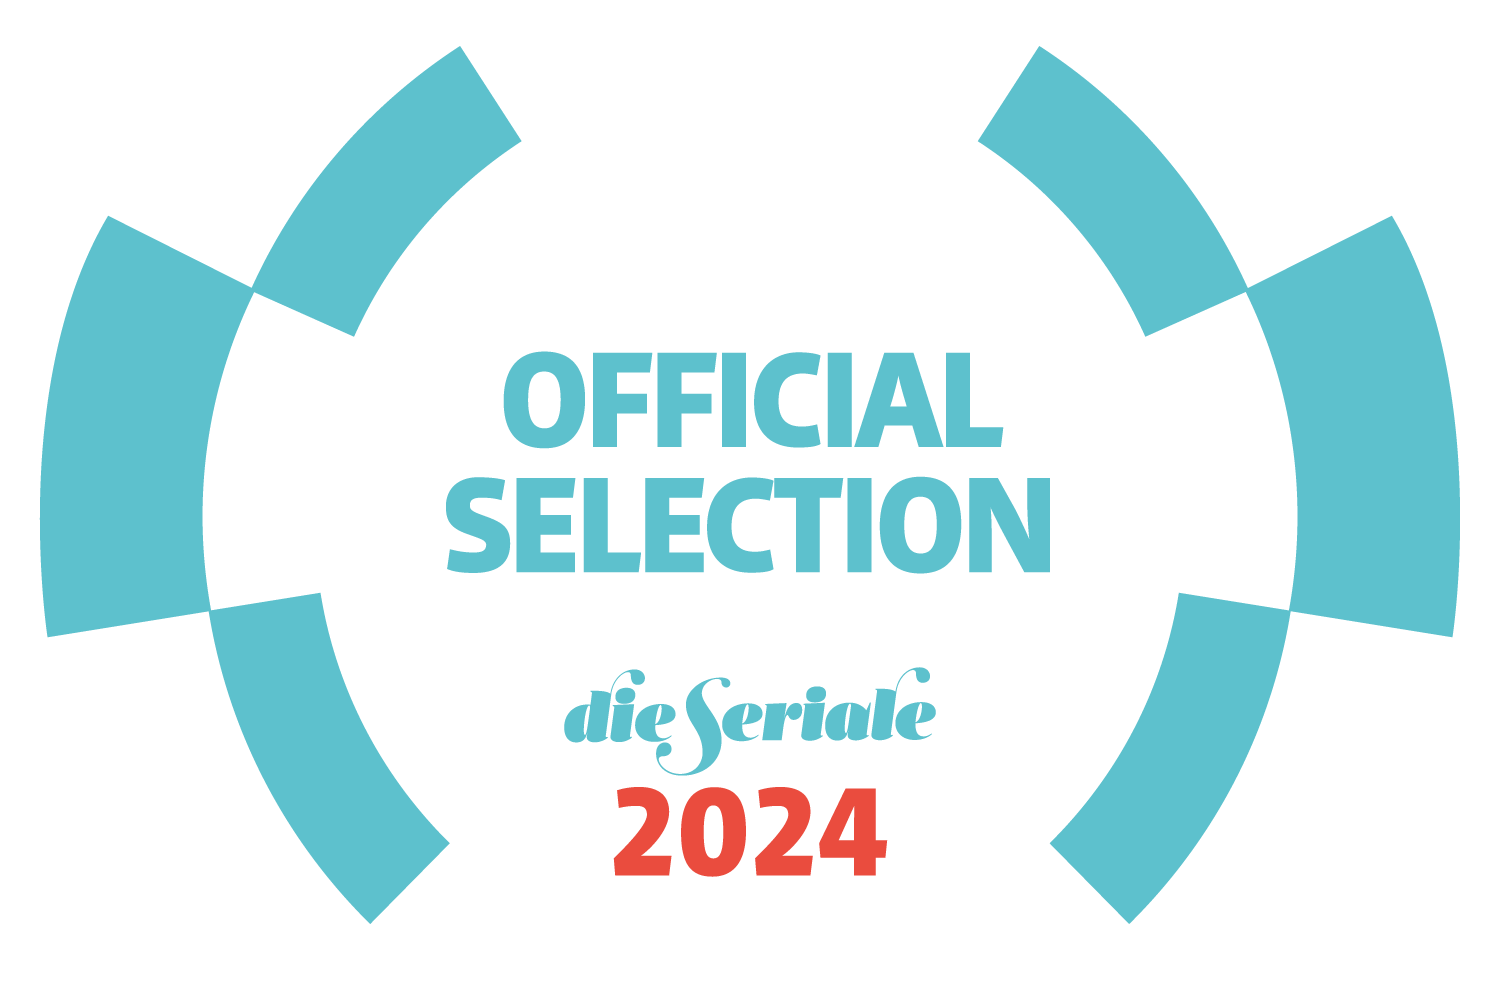 Official Selection die Seriale ´